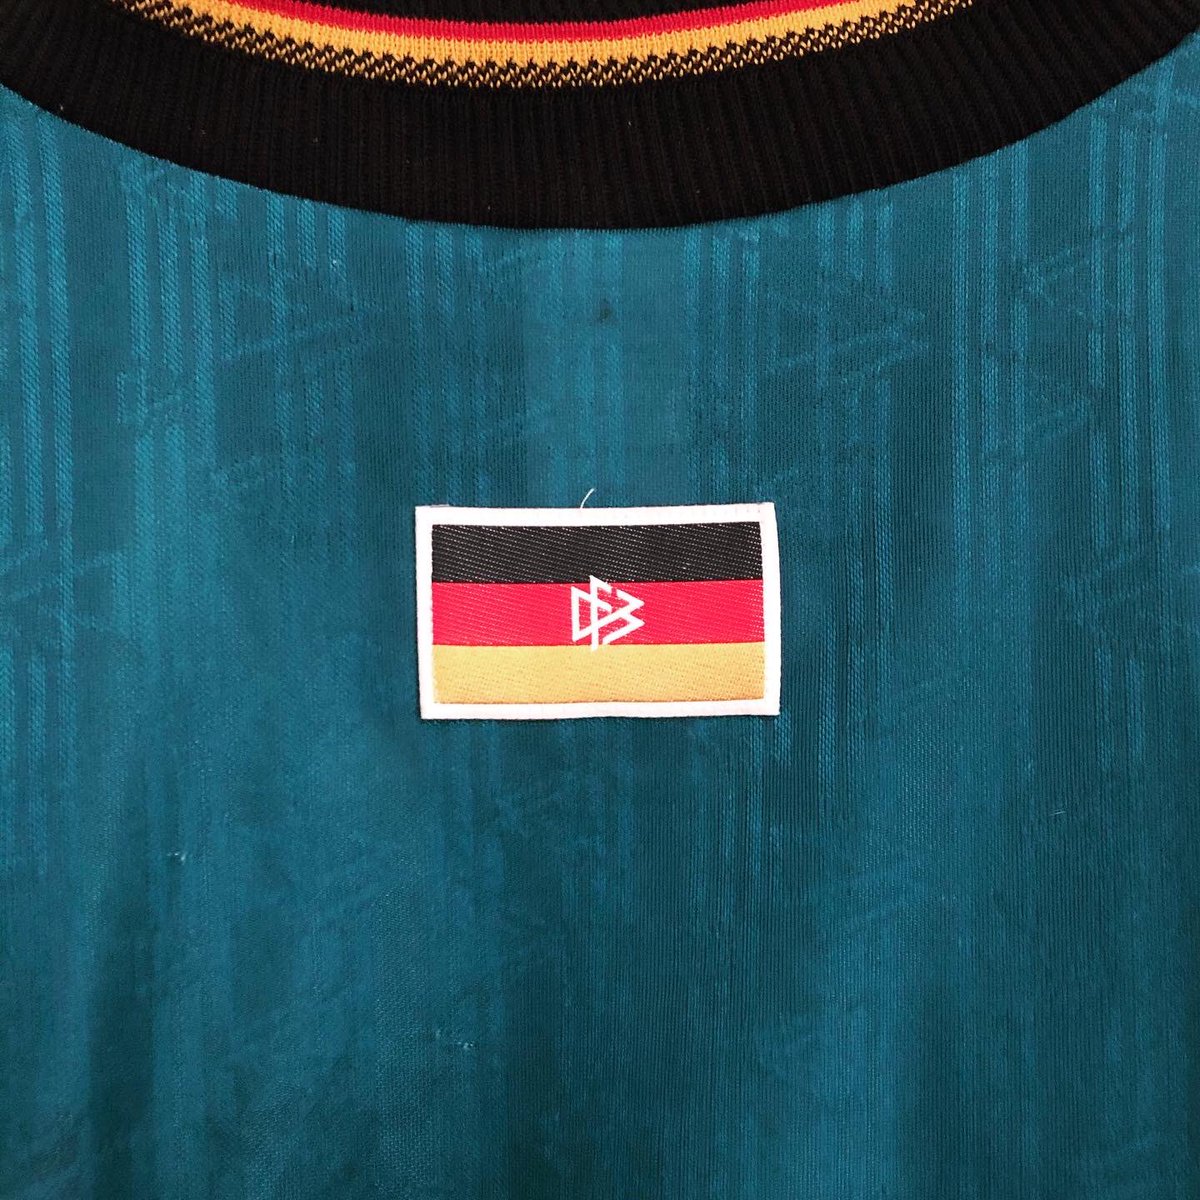 . @DFB_Team_EN Away kit, 1996AdidasGermany is the national team that features the most in my collection (5). This wonderful kit from 1996 was in fact never used in any major competition by the German national team, which is a shame #ClassicFootballShirts  #DieMannschaft